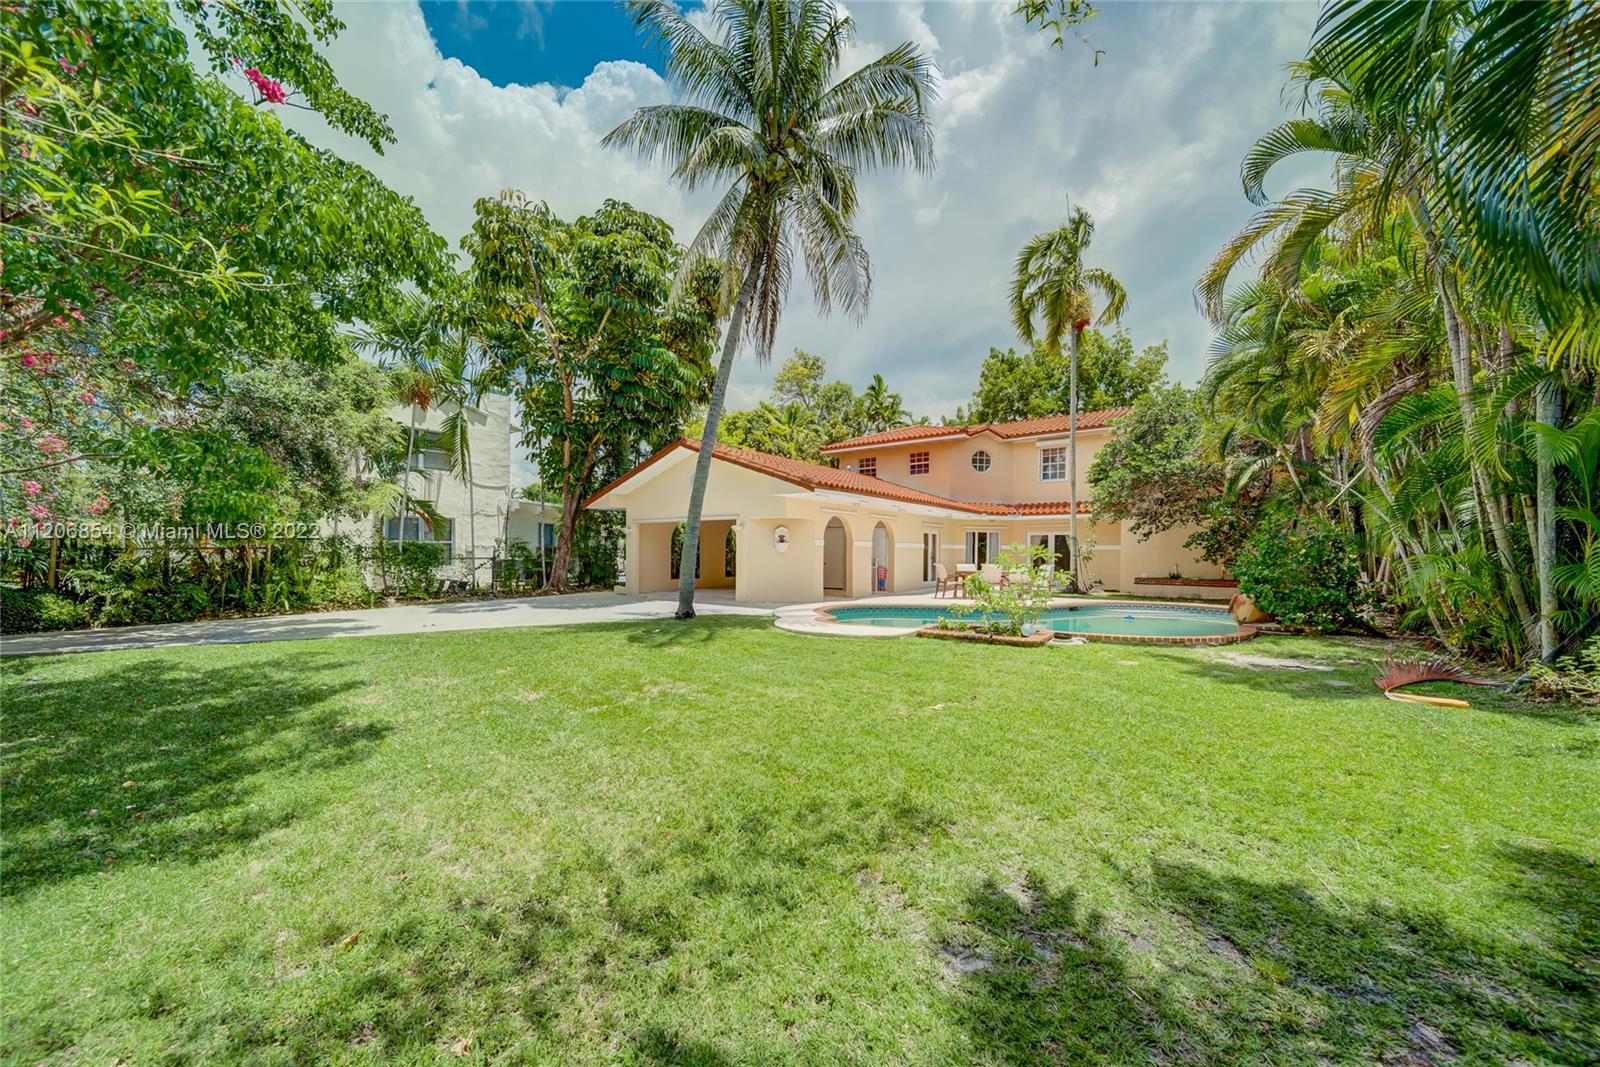 Beautiful Spanish Style two-story home in “The Roads” Area of Miami, featuring 5 bedrooms and 3.5 bathrooms, this property sits on an over-sized lot of almost 10,000 sq/ft and is surrounded by mature large fruit trees throughout. Renovated areas in the kitchen, Master Bedroom and Master Bathroom.  Double car garage plus bonus room and a Large pool with Partly covered terrace. Privacy wall on the street creates a completely private oasis for the homeowner.  Beautiful original wood floors upstairs.  Minutes from Downtown Miami, Brickell, Coconut Grove, Coral Gables, Key Biscayne and Miami Beach. Please call listing agent for showings.